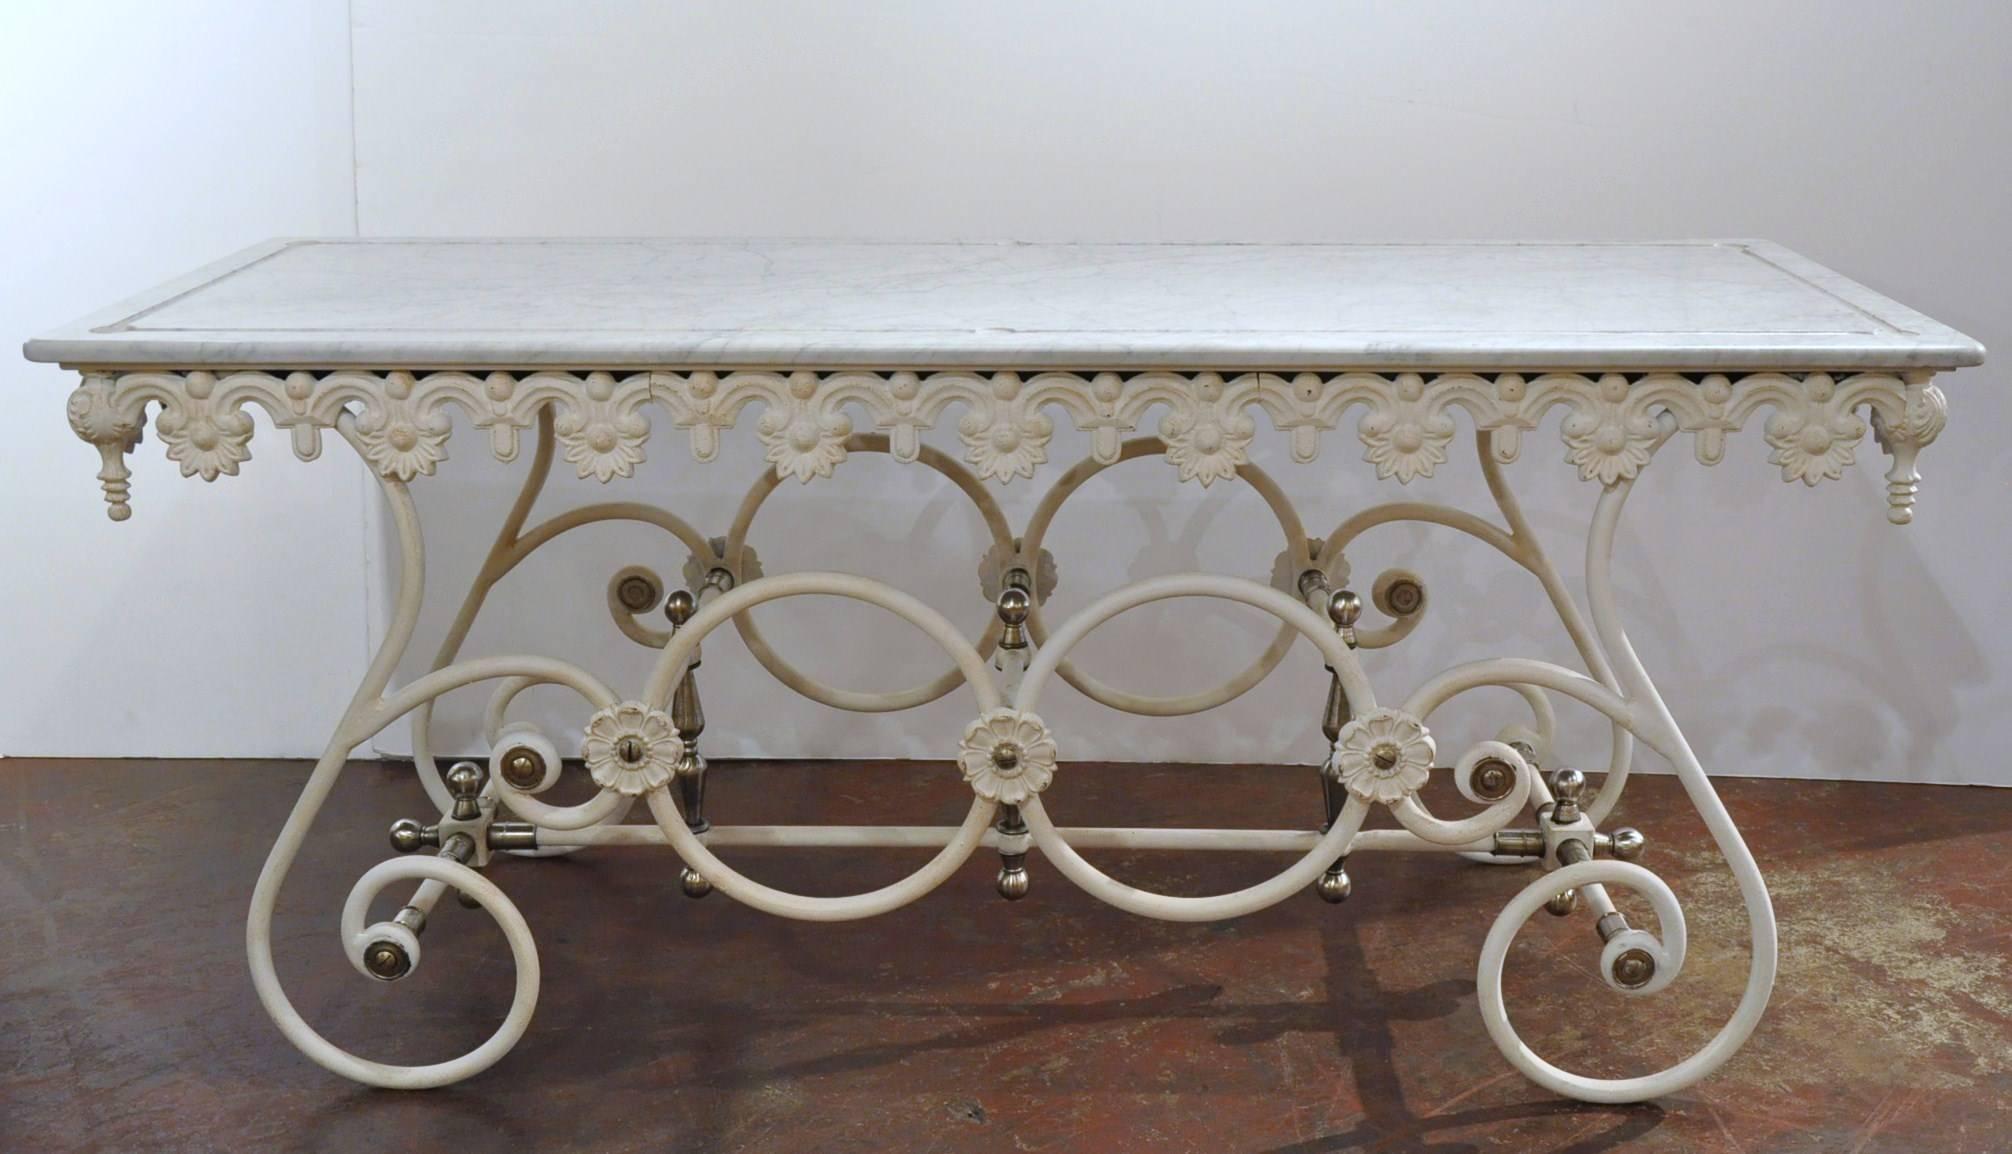 Elegant painted butcher table from France with white marble top, ornate cast freeze, graceful scrolled steel legs with brass fitting and finials.
 The French 